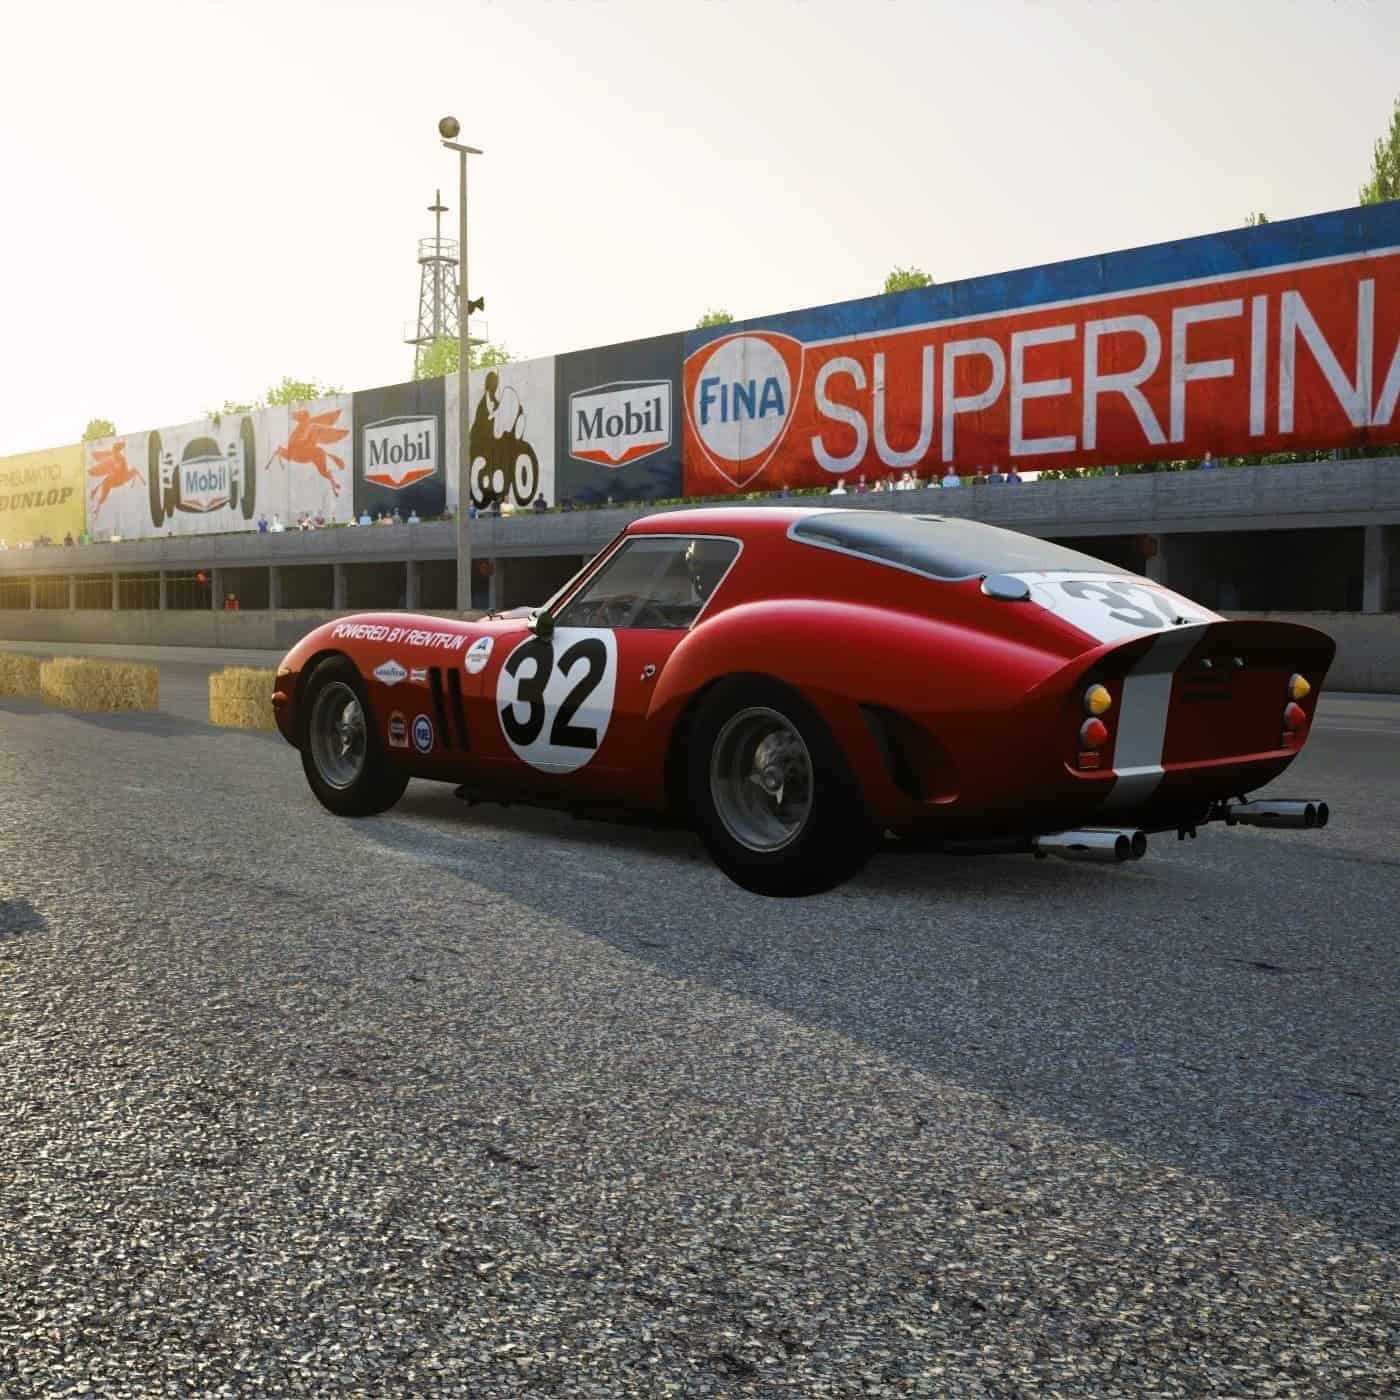 Rent Classic Cars simulator experience Monza Ferrari 250 GTO Italy with delivery. Hire historical car simulator experience with support company branding